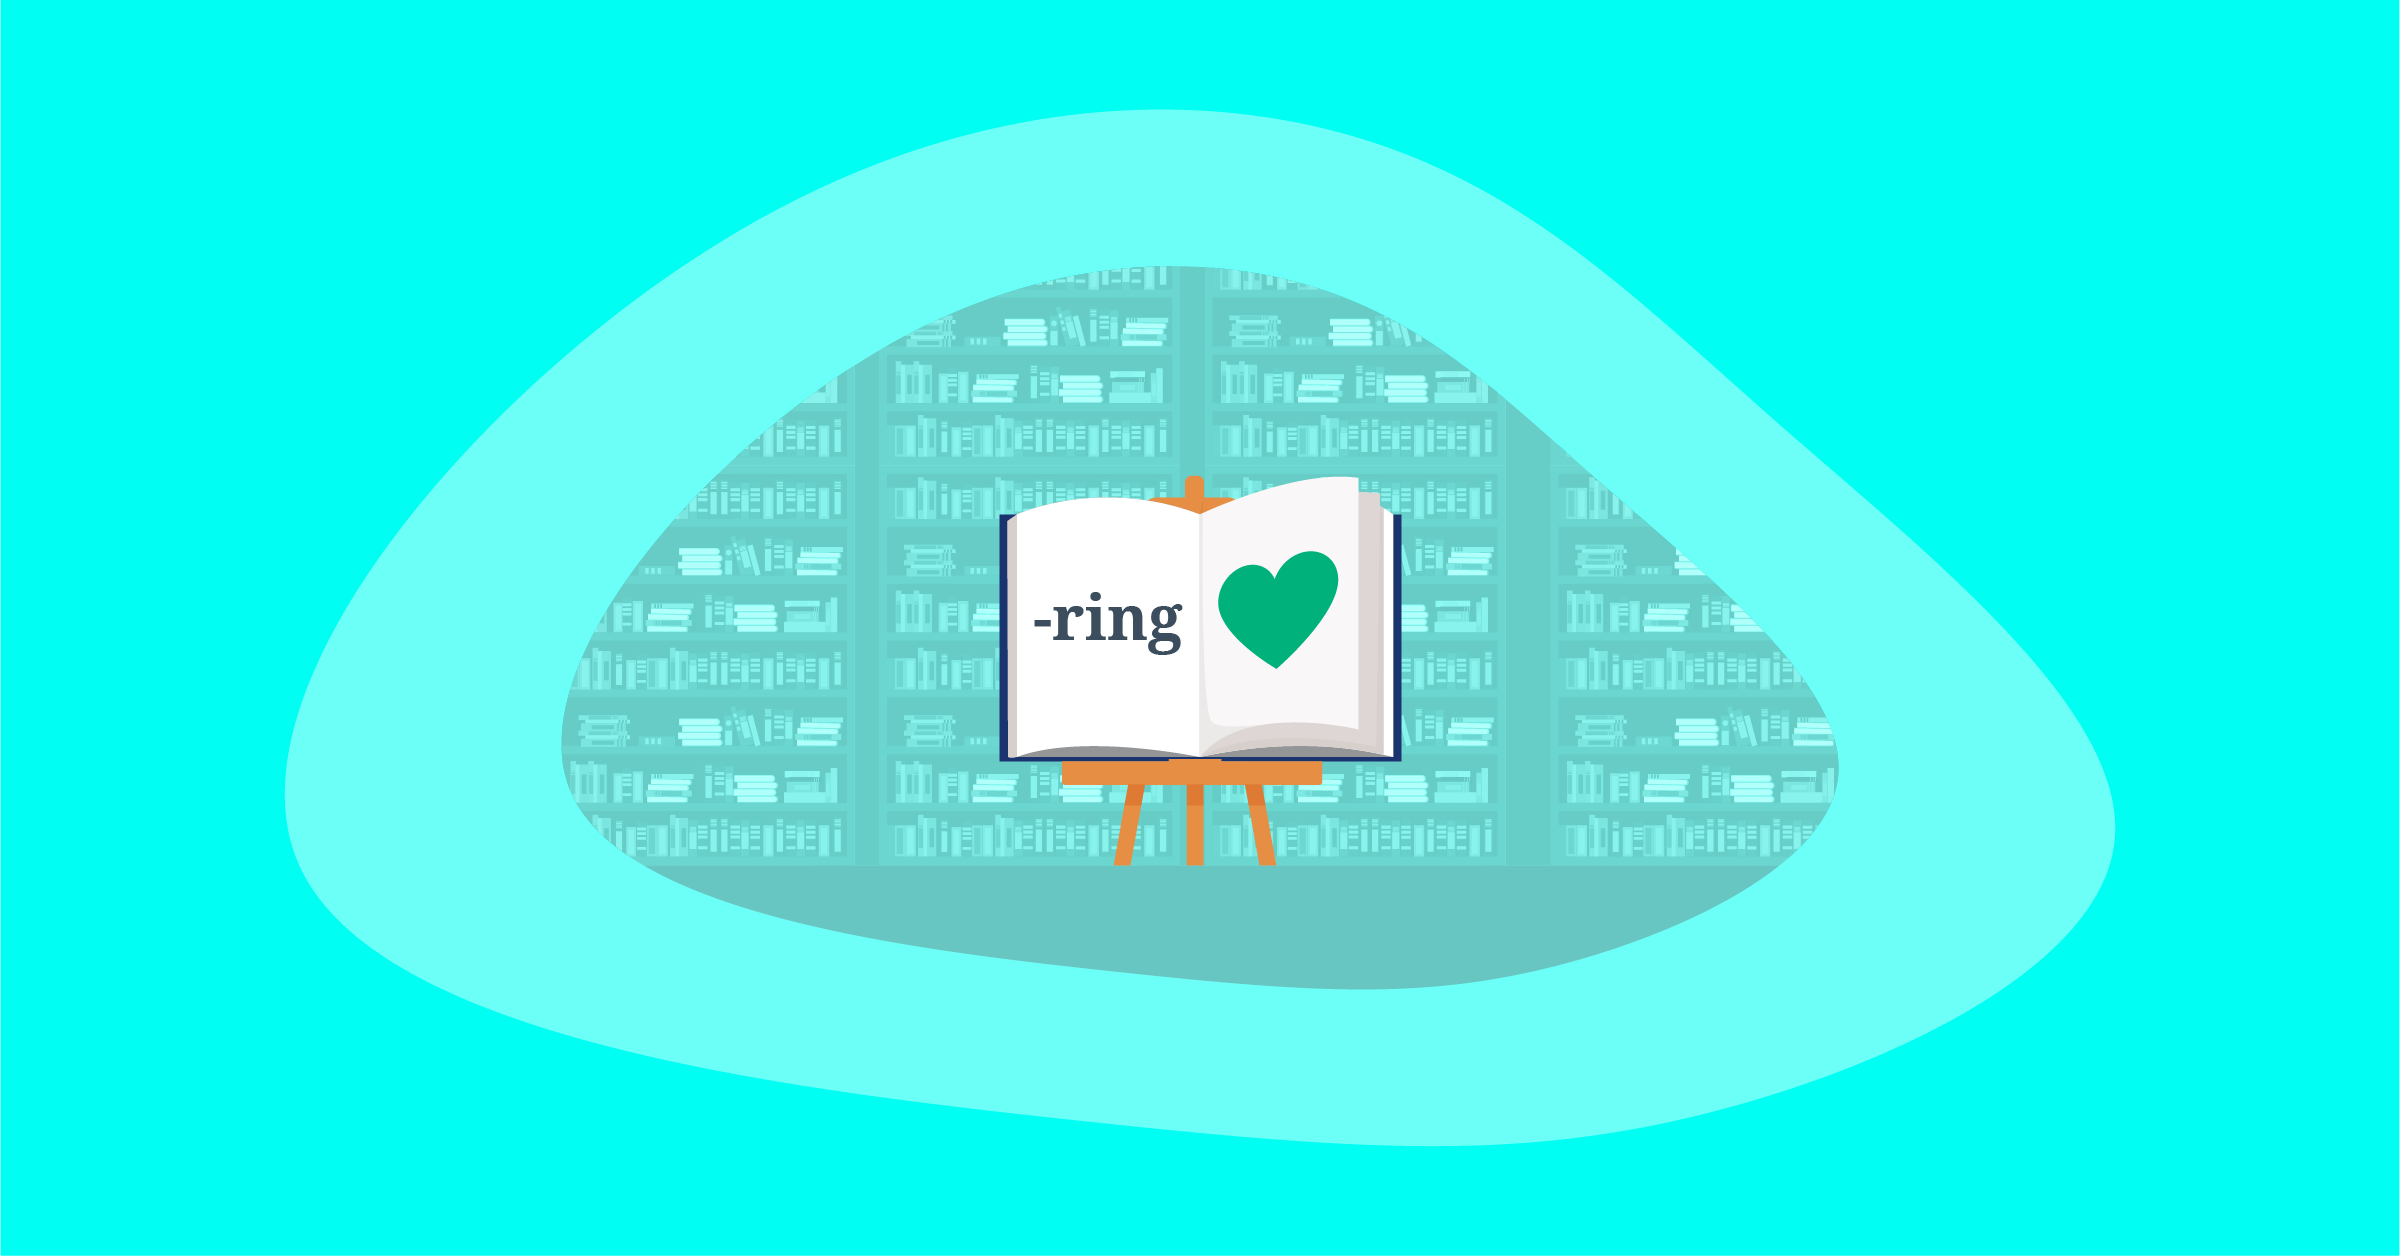 Illustration of all positive impactful words ending in -ring